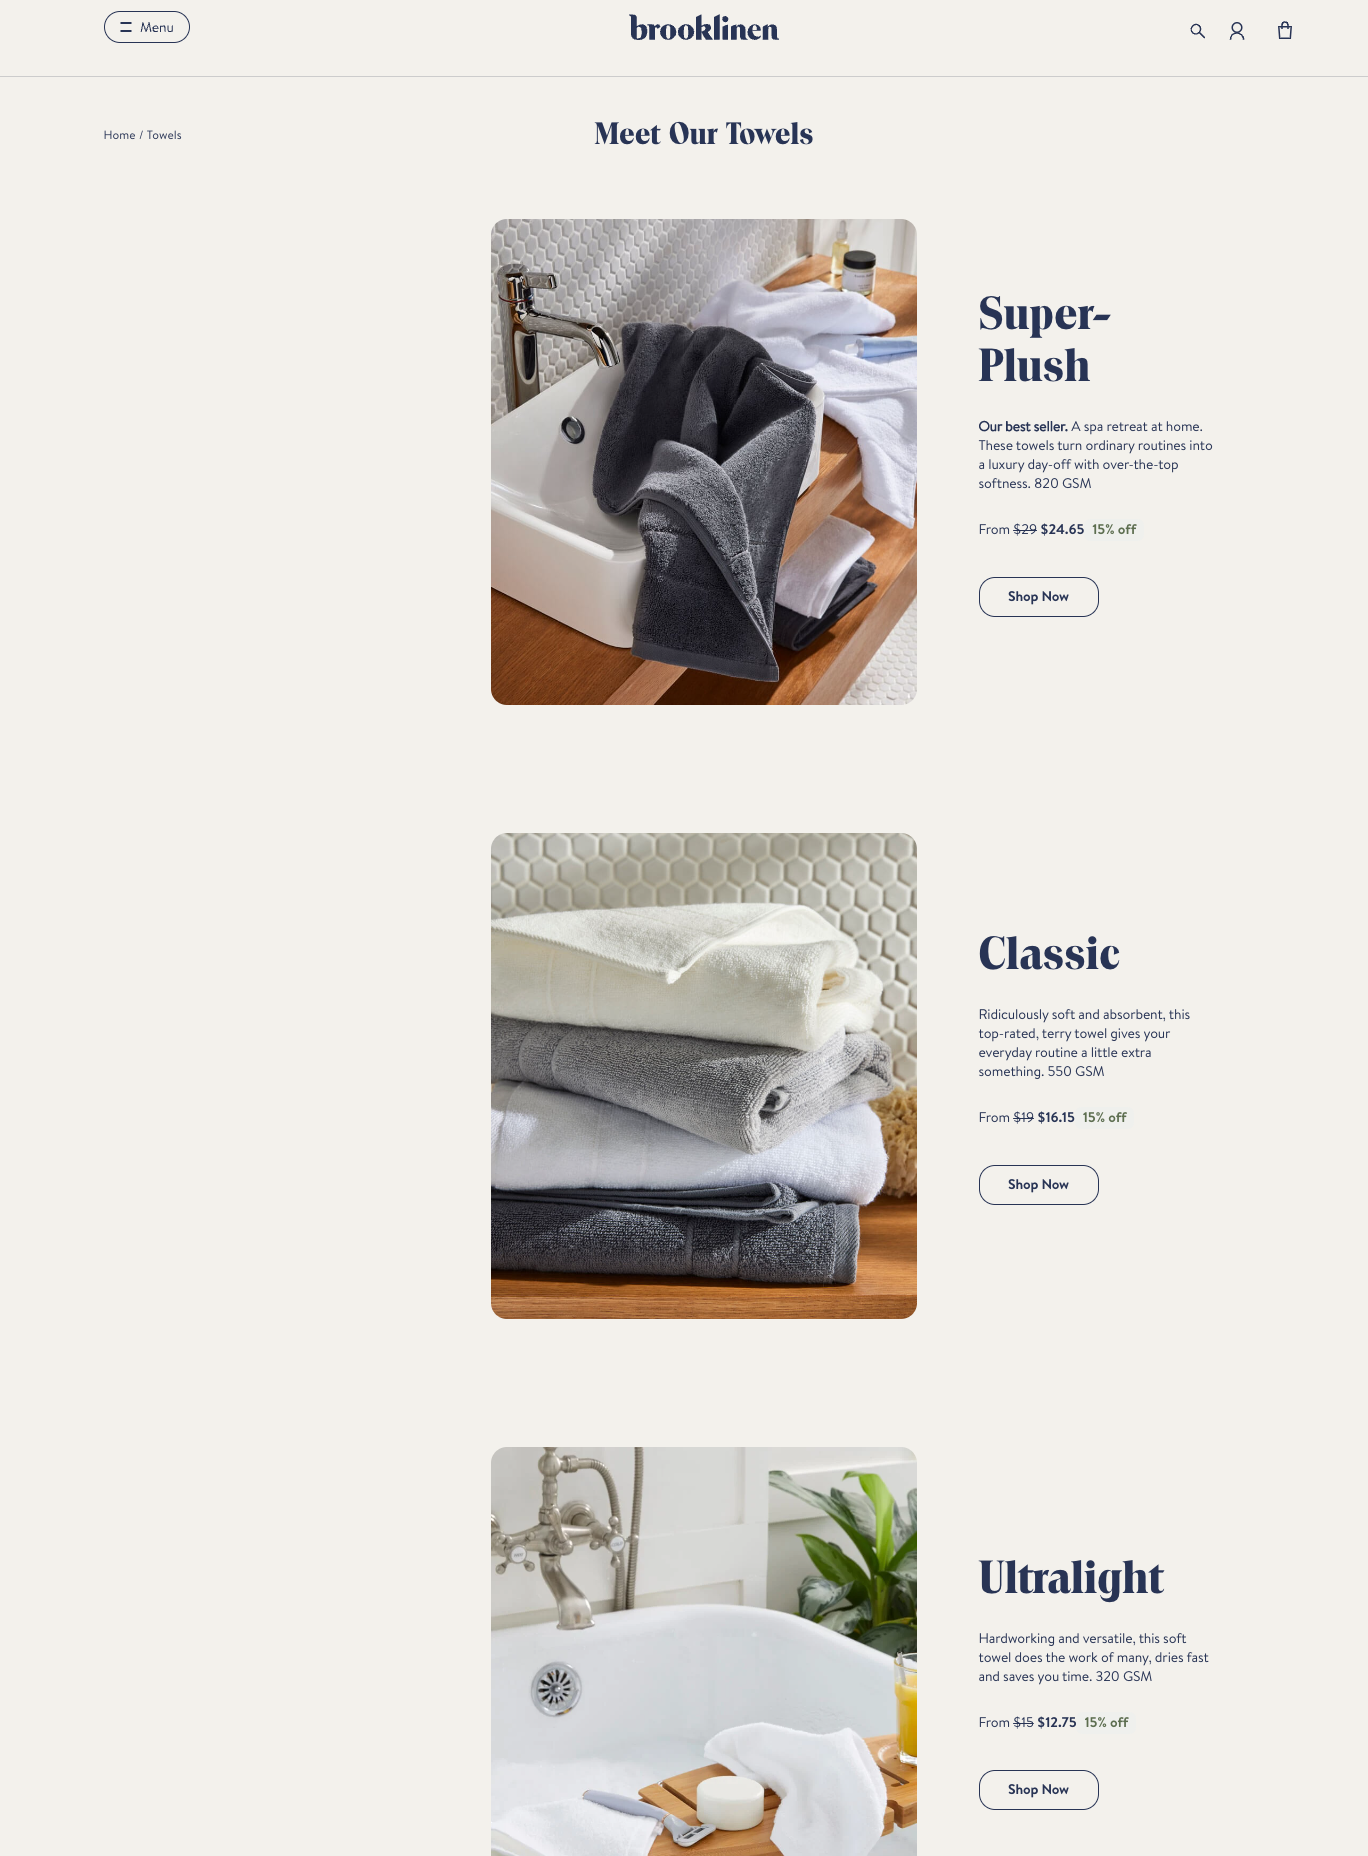 Brooklinen, a bedding and home goods brand, uses a list view to showcase their product sub-categories in a more detailed and informative way.